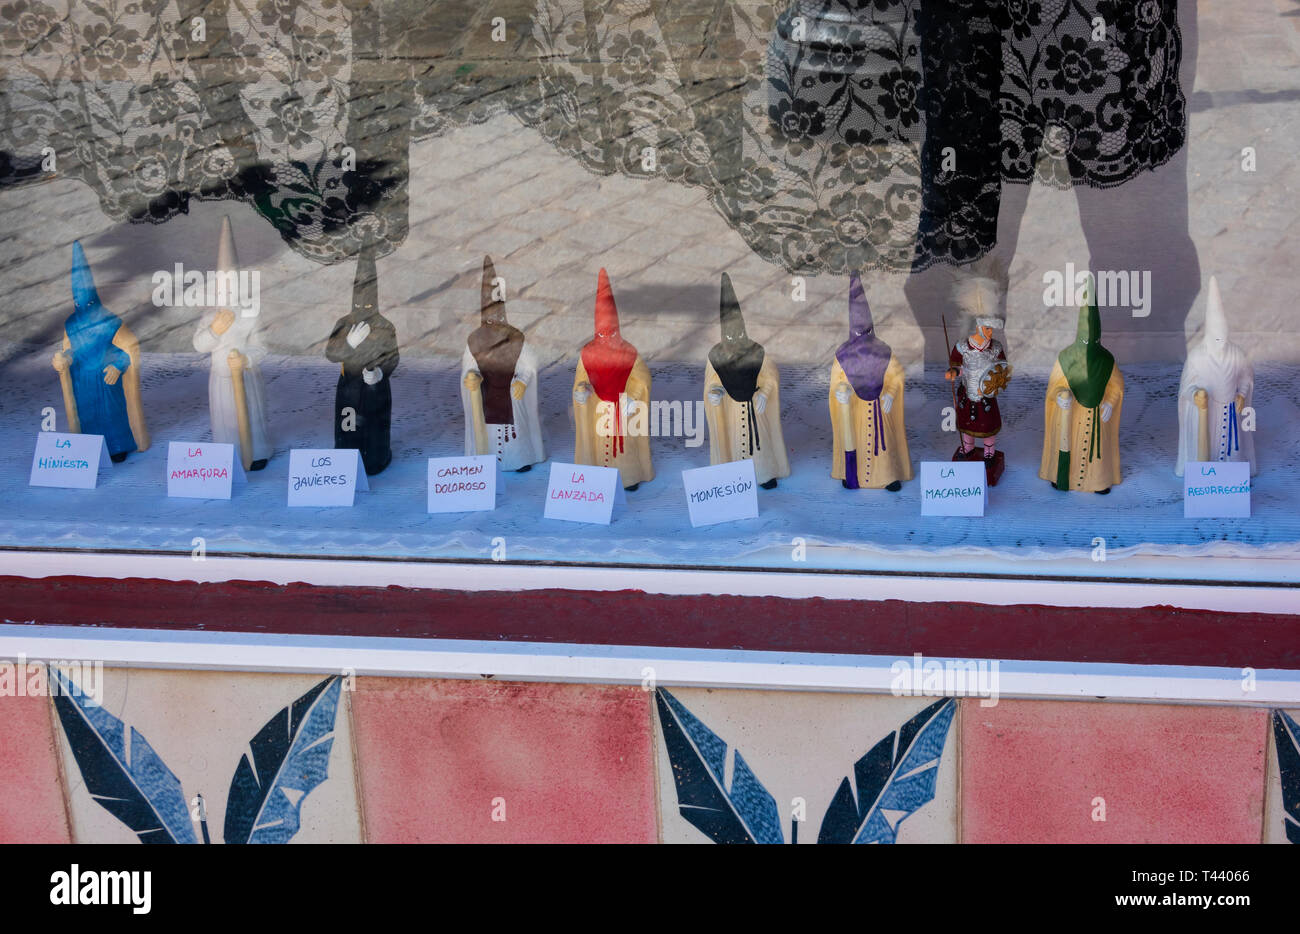 Tiny sculptures of the Capirote in a shop window in Seville Stock Photo